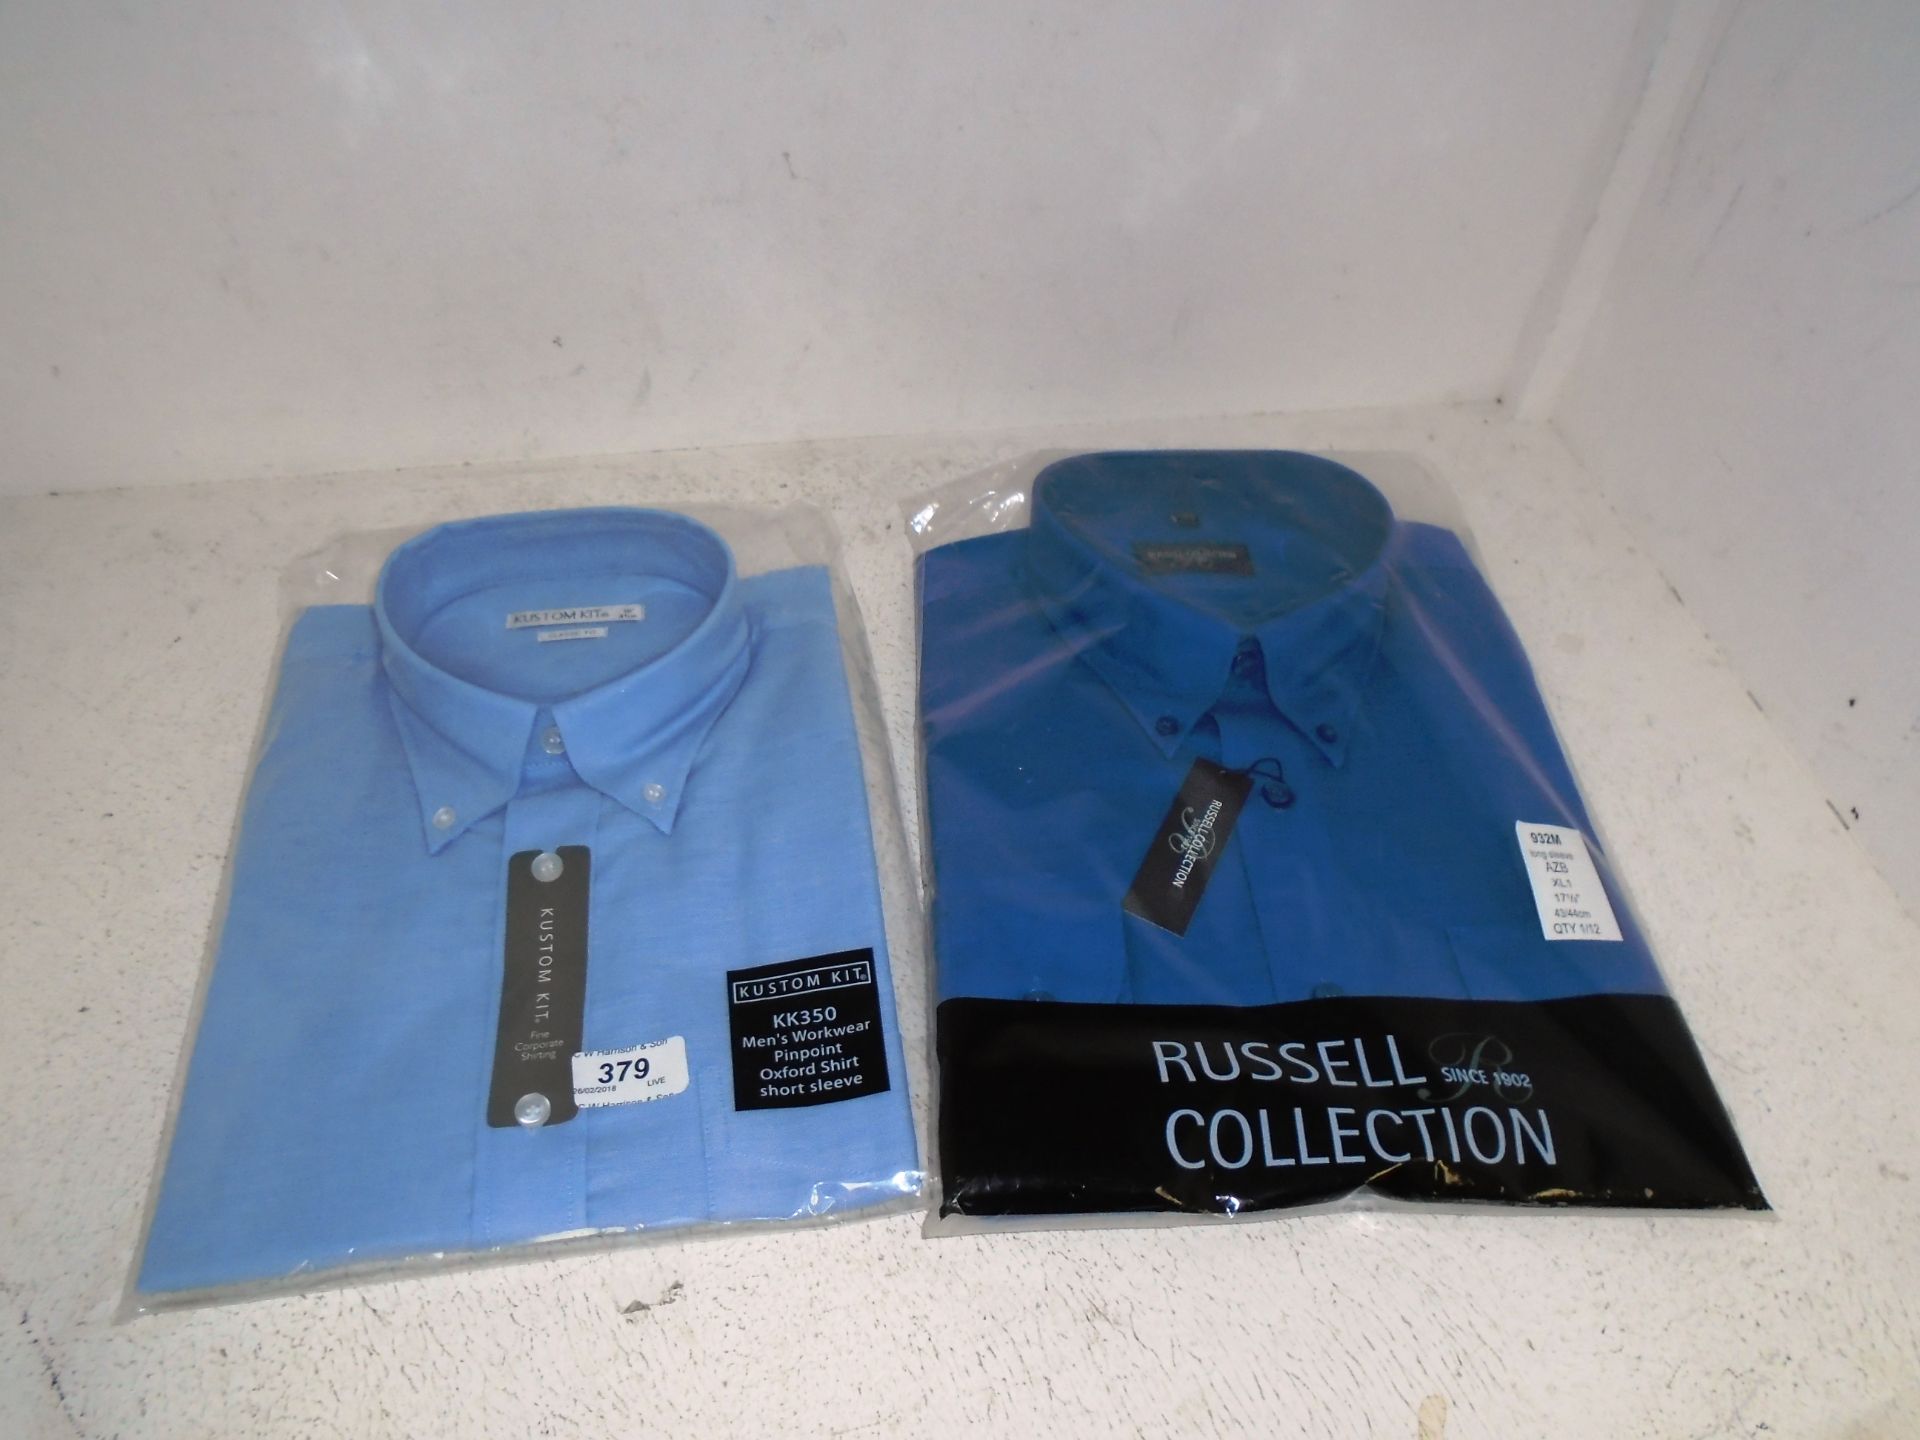 15 x assorted workshirts by Russell Collection in navy and sky blue